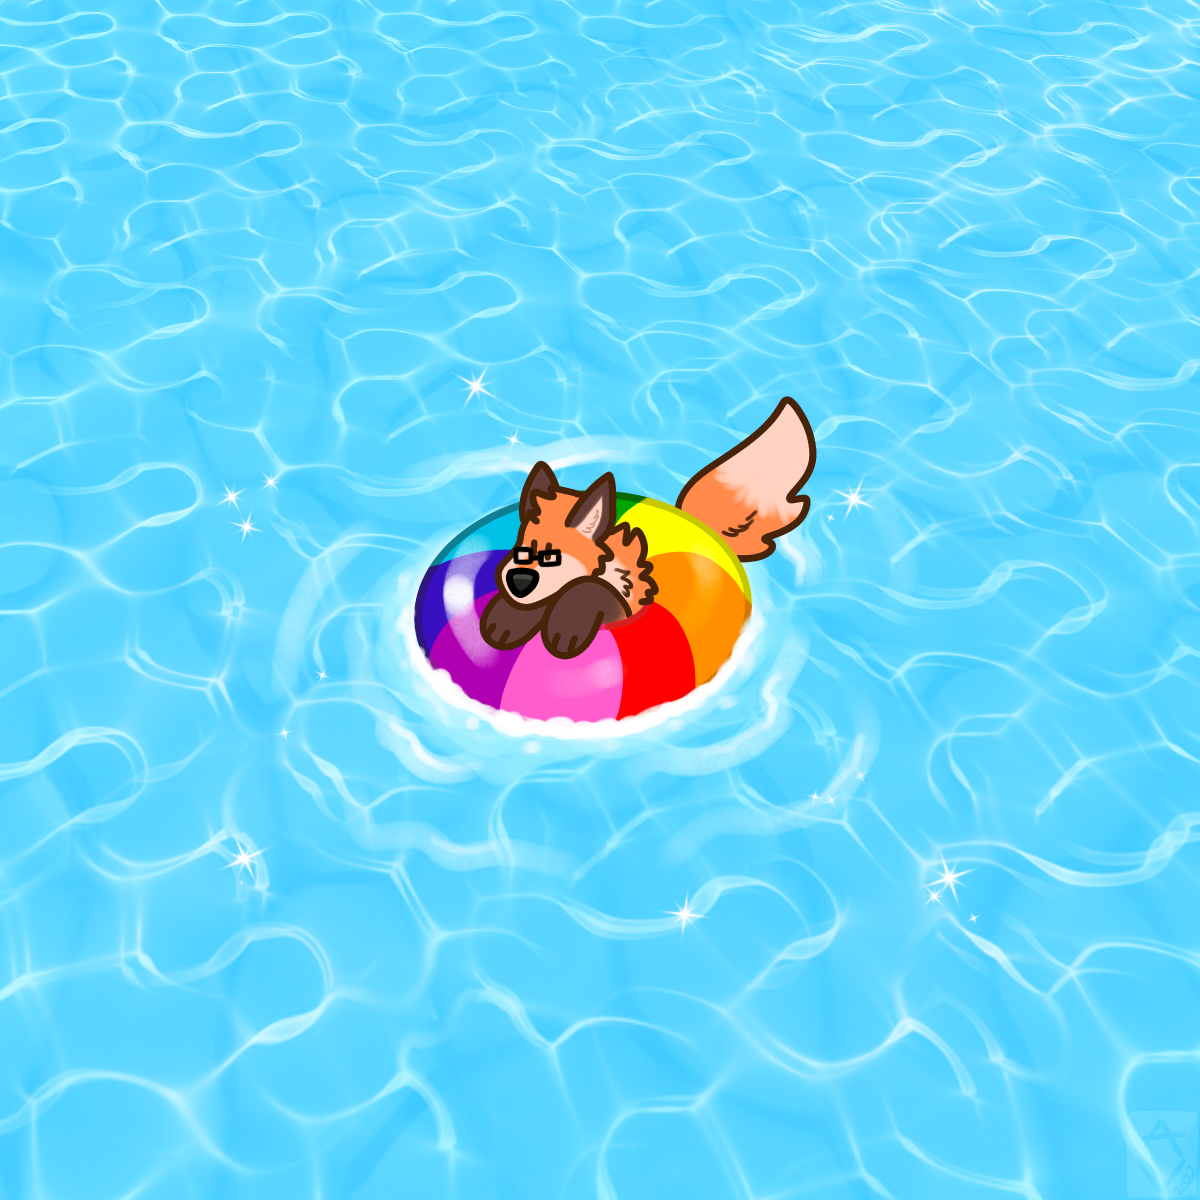 Fox pool party by @softSweetMello